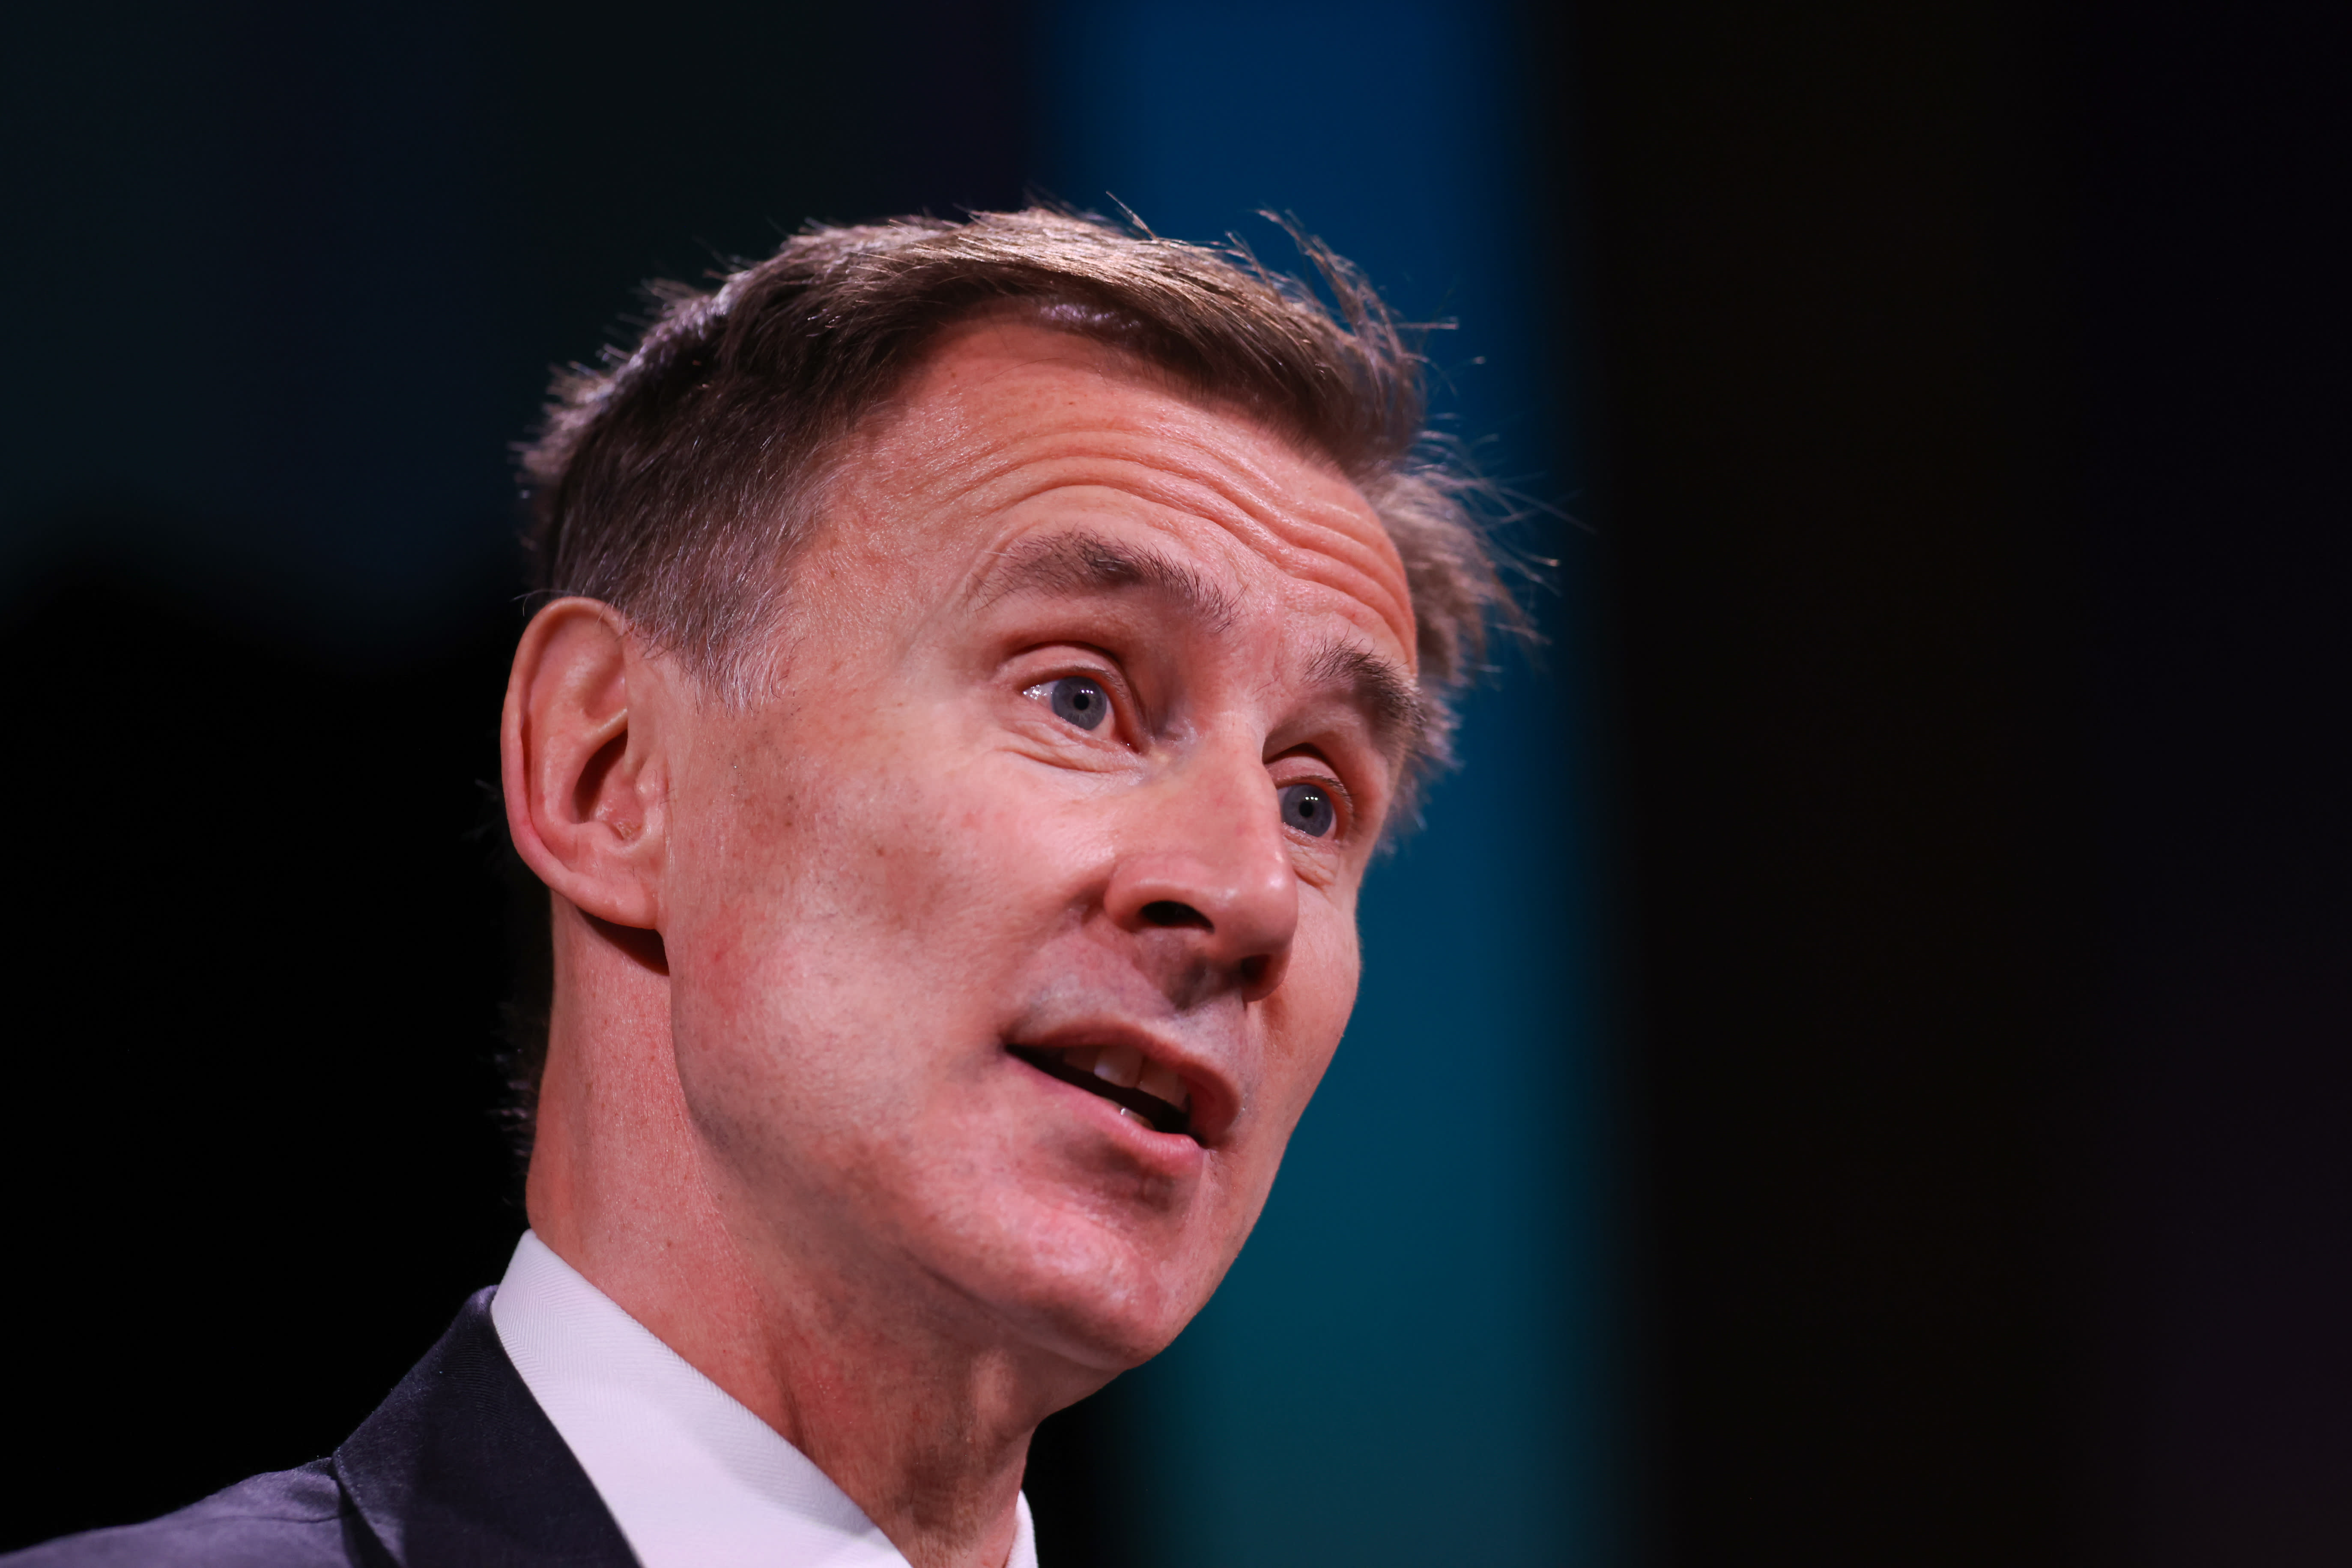 UK Chancellor of the Exchequer Jeremy Hunt warns that inflation is still far too high